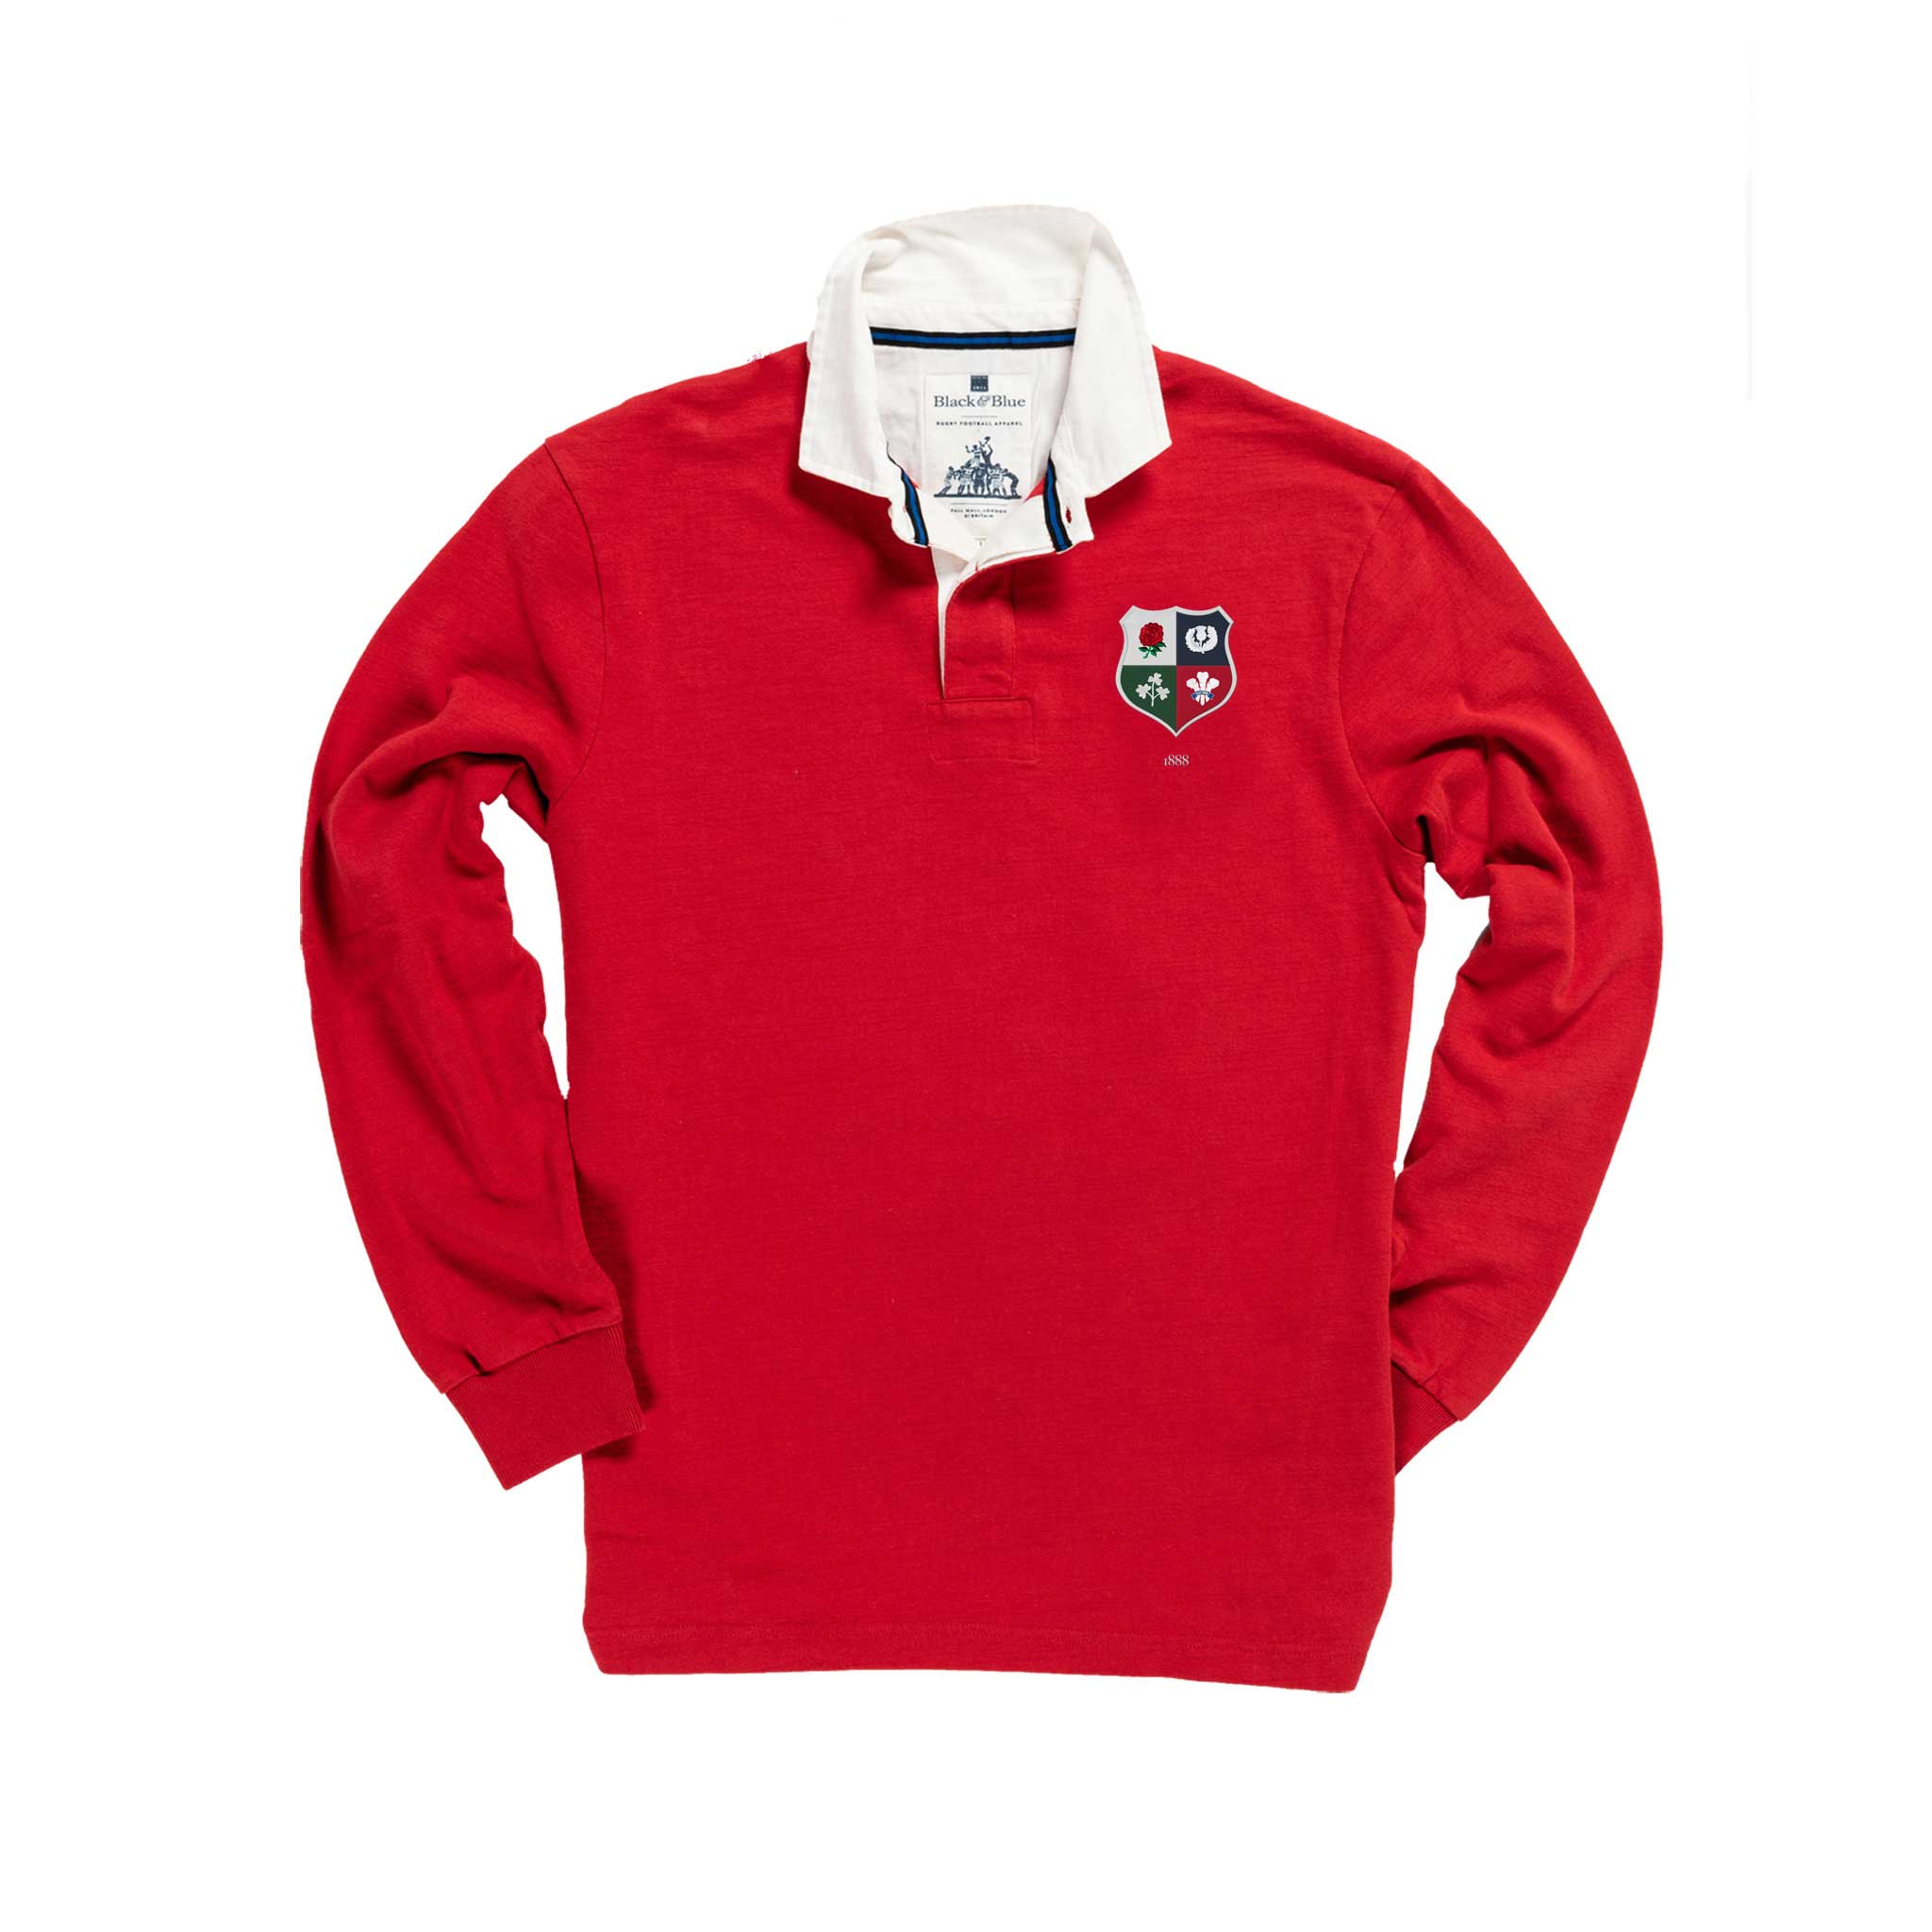 british lions rugby jersey